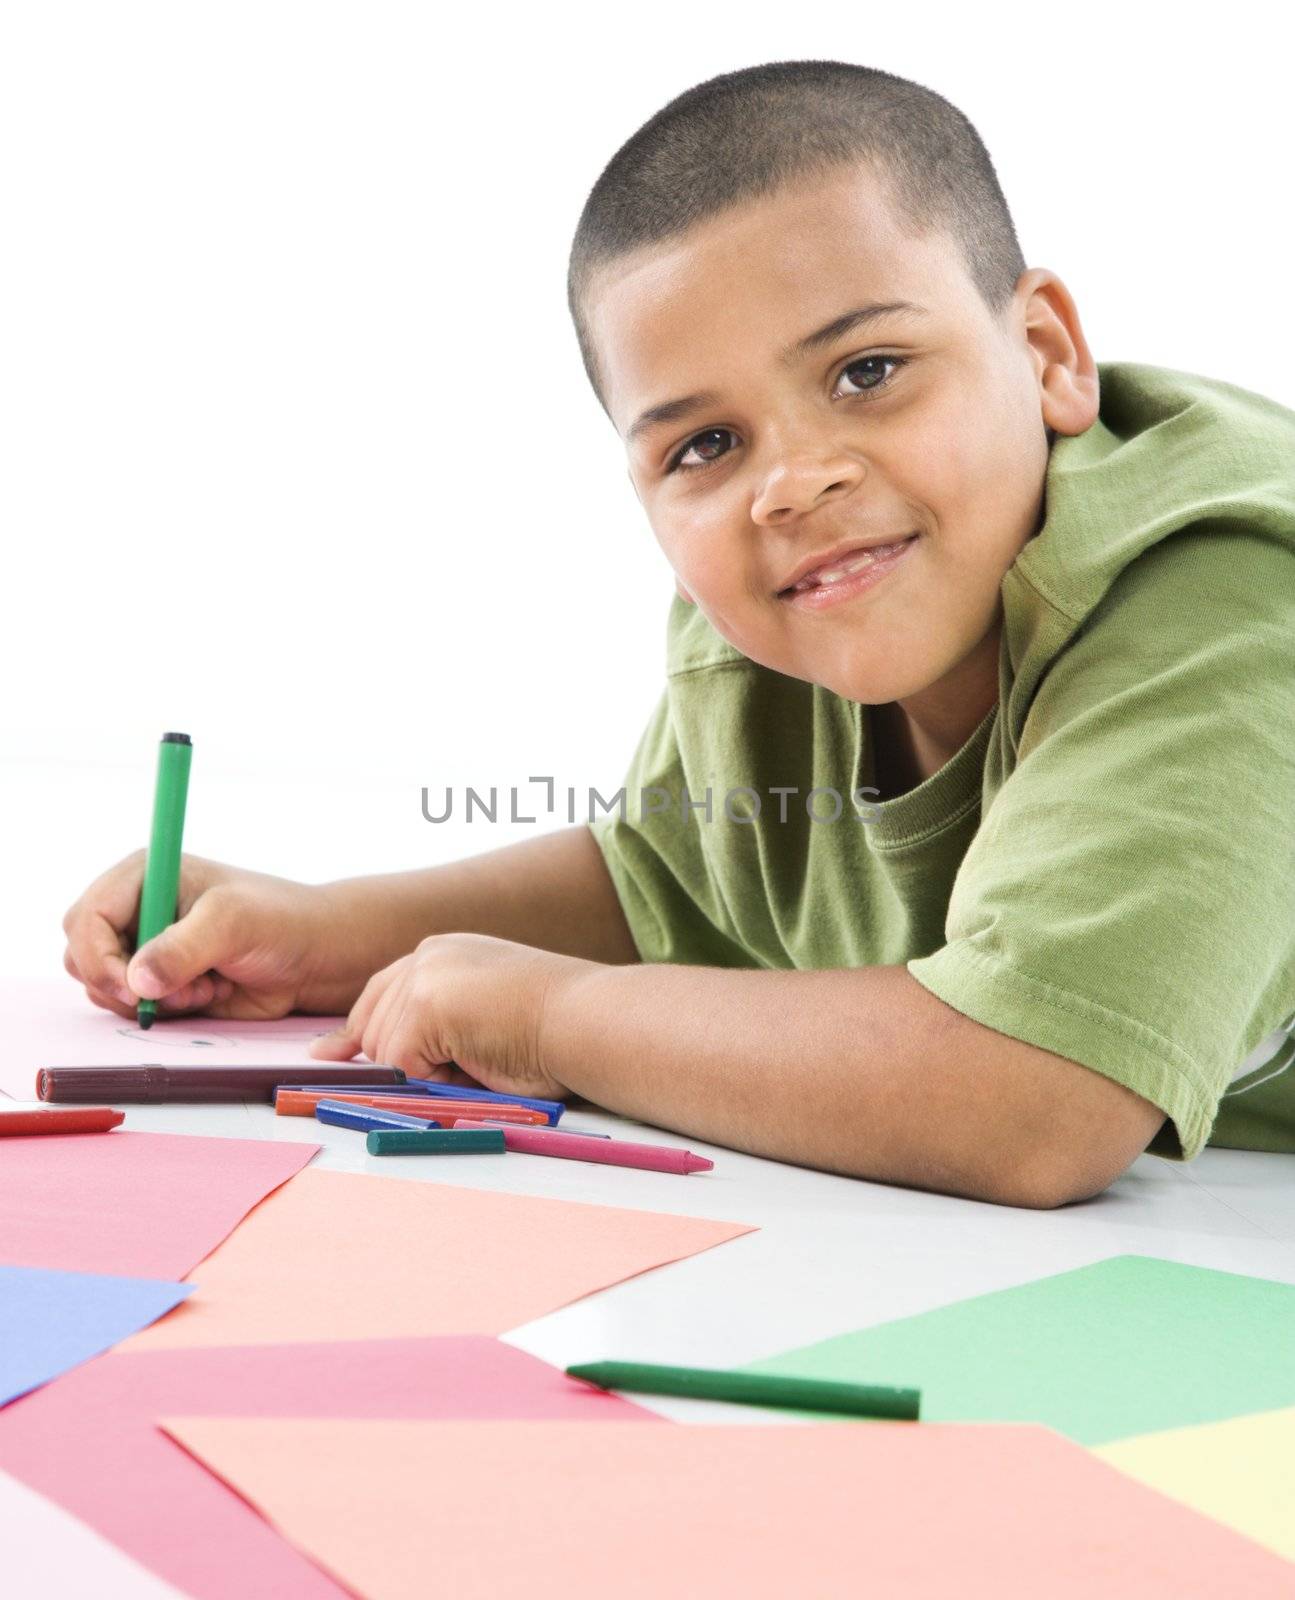 Young latino boy coloring on construction paper.